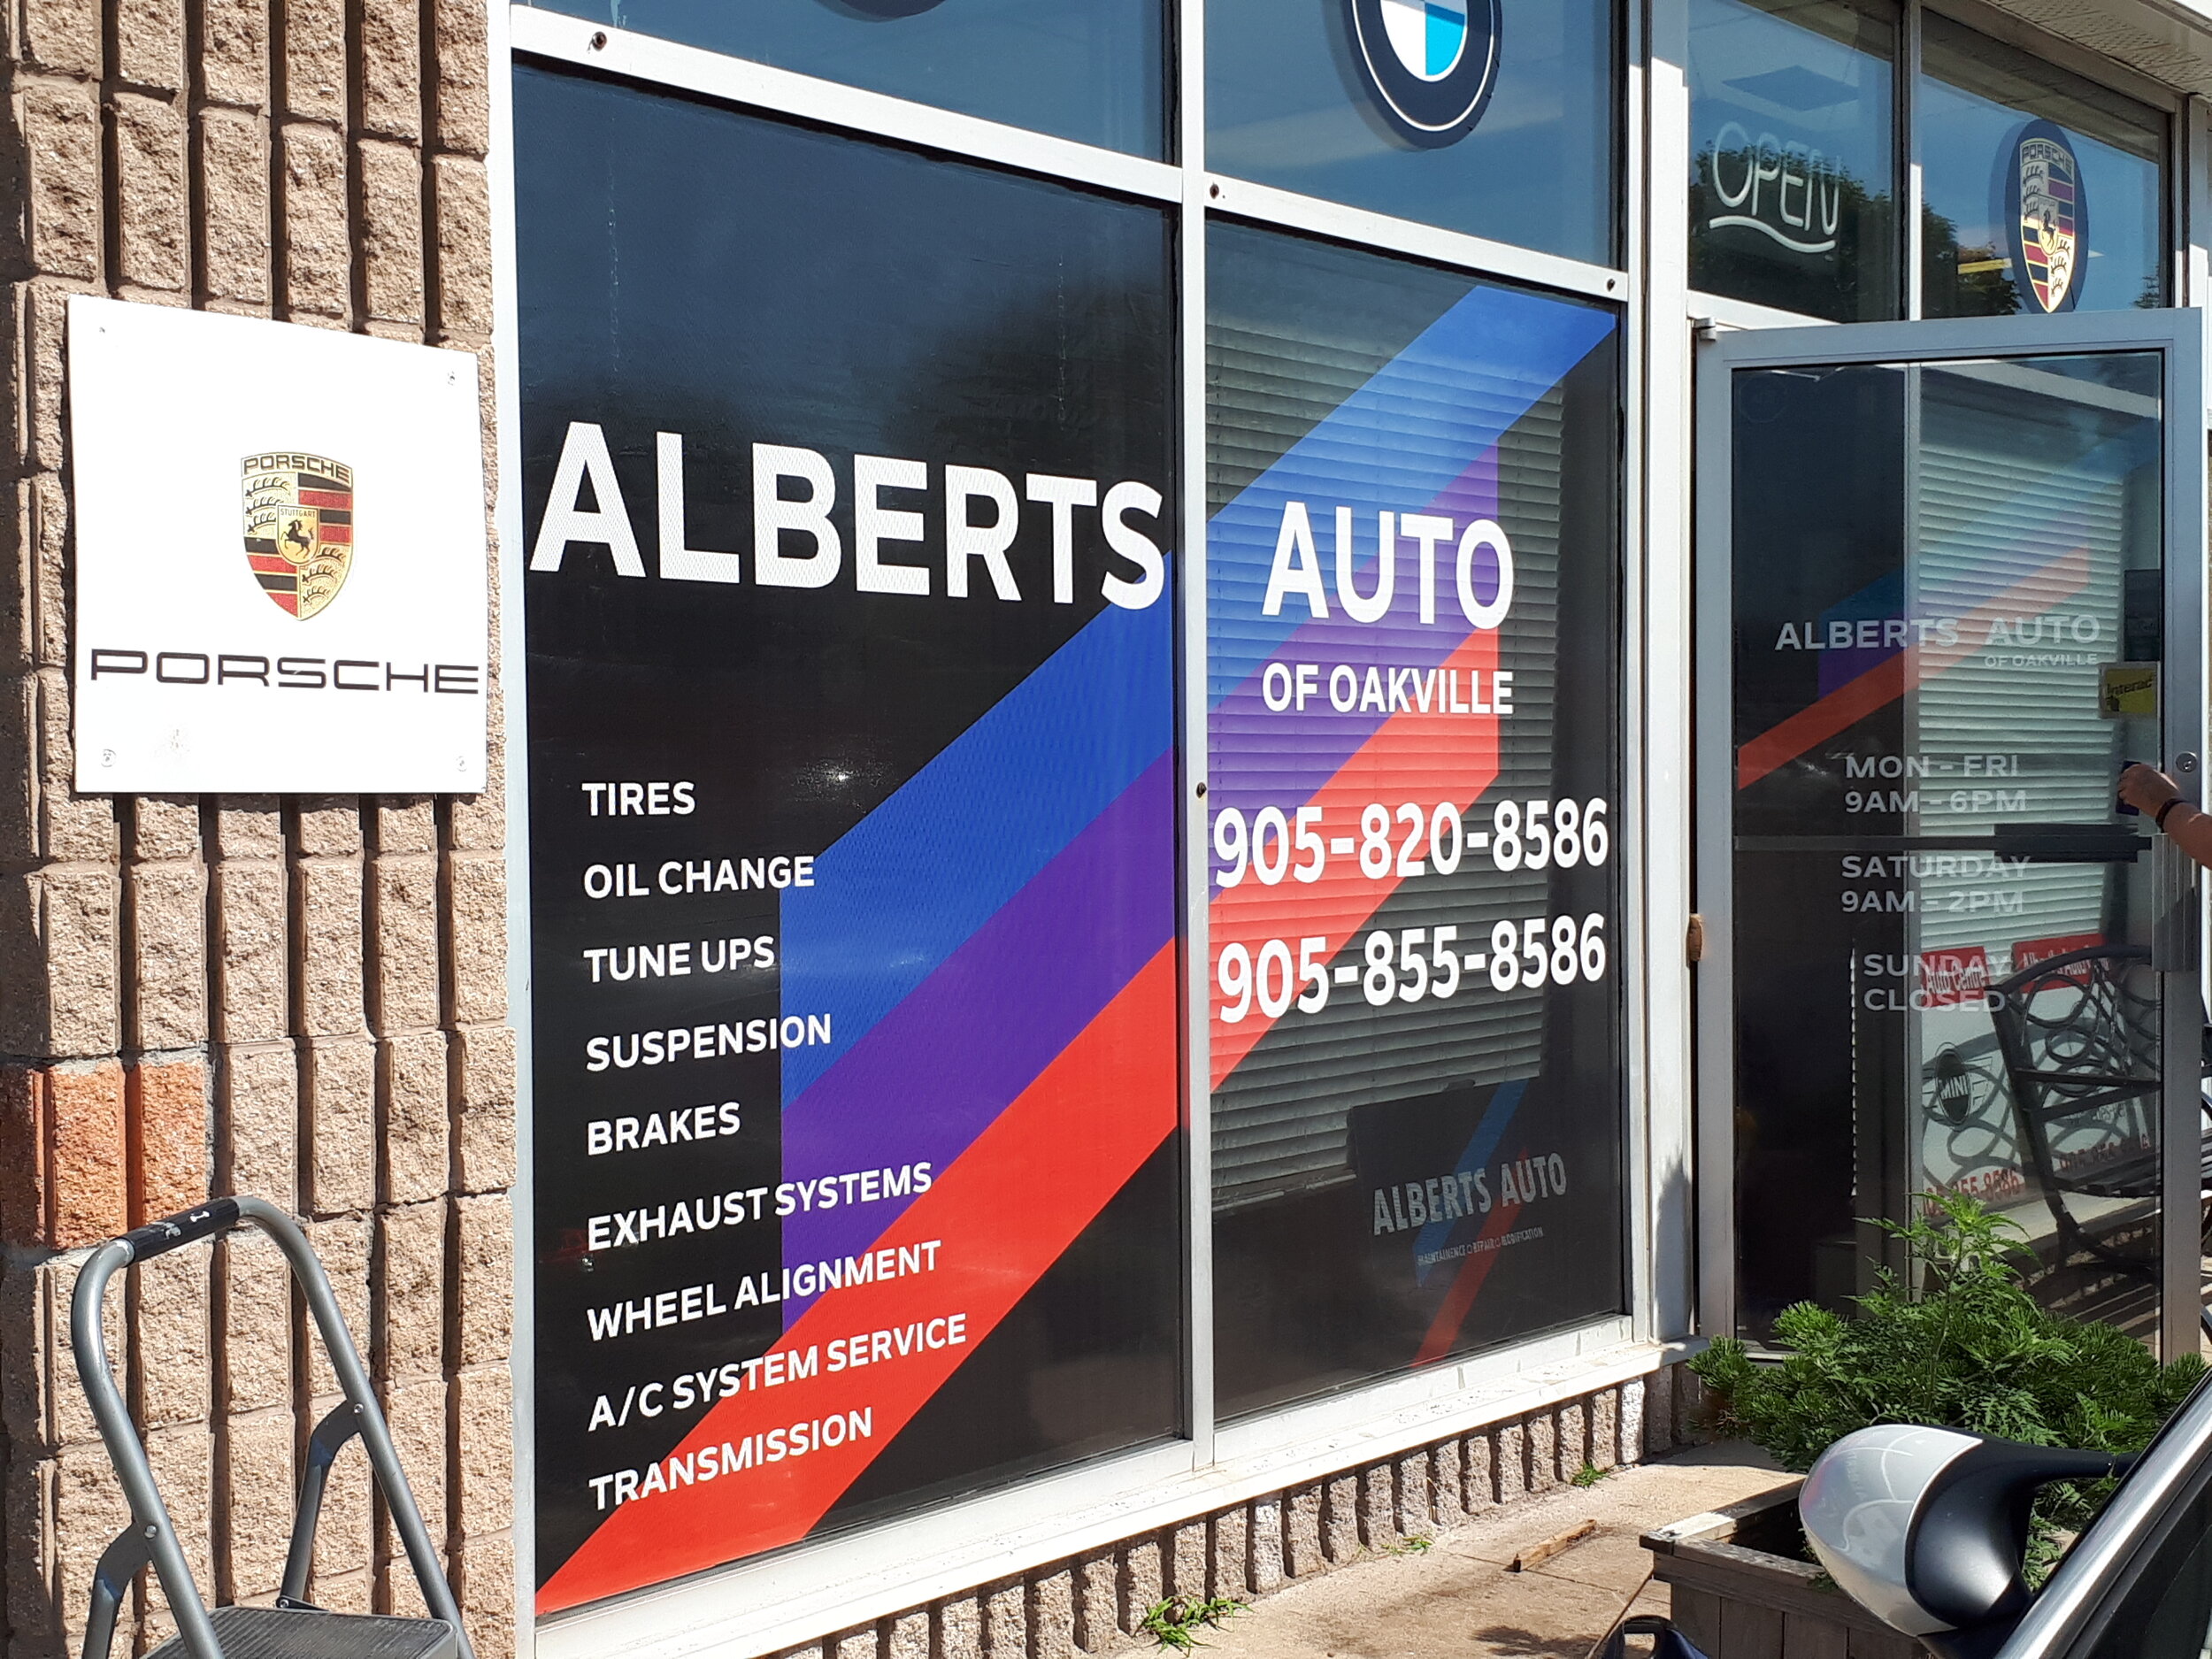 Miltown Signs and Graphics-window graphics- 3m window perf-window view through-window tint-window advertising-Milton-Ontario.jpg